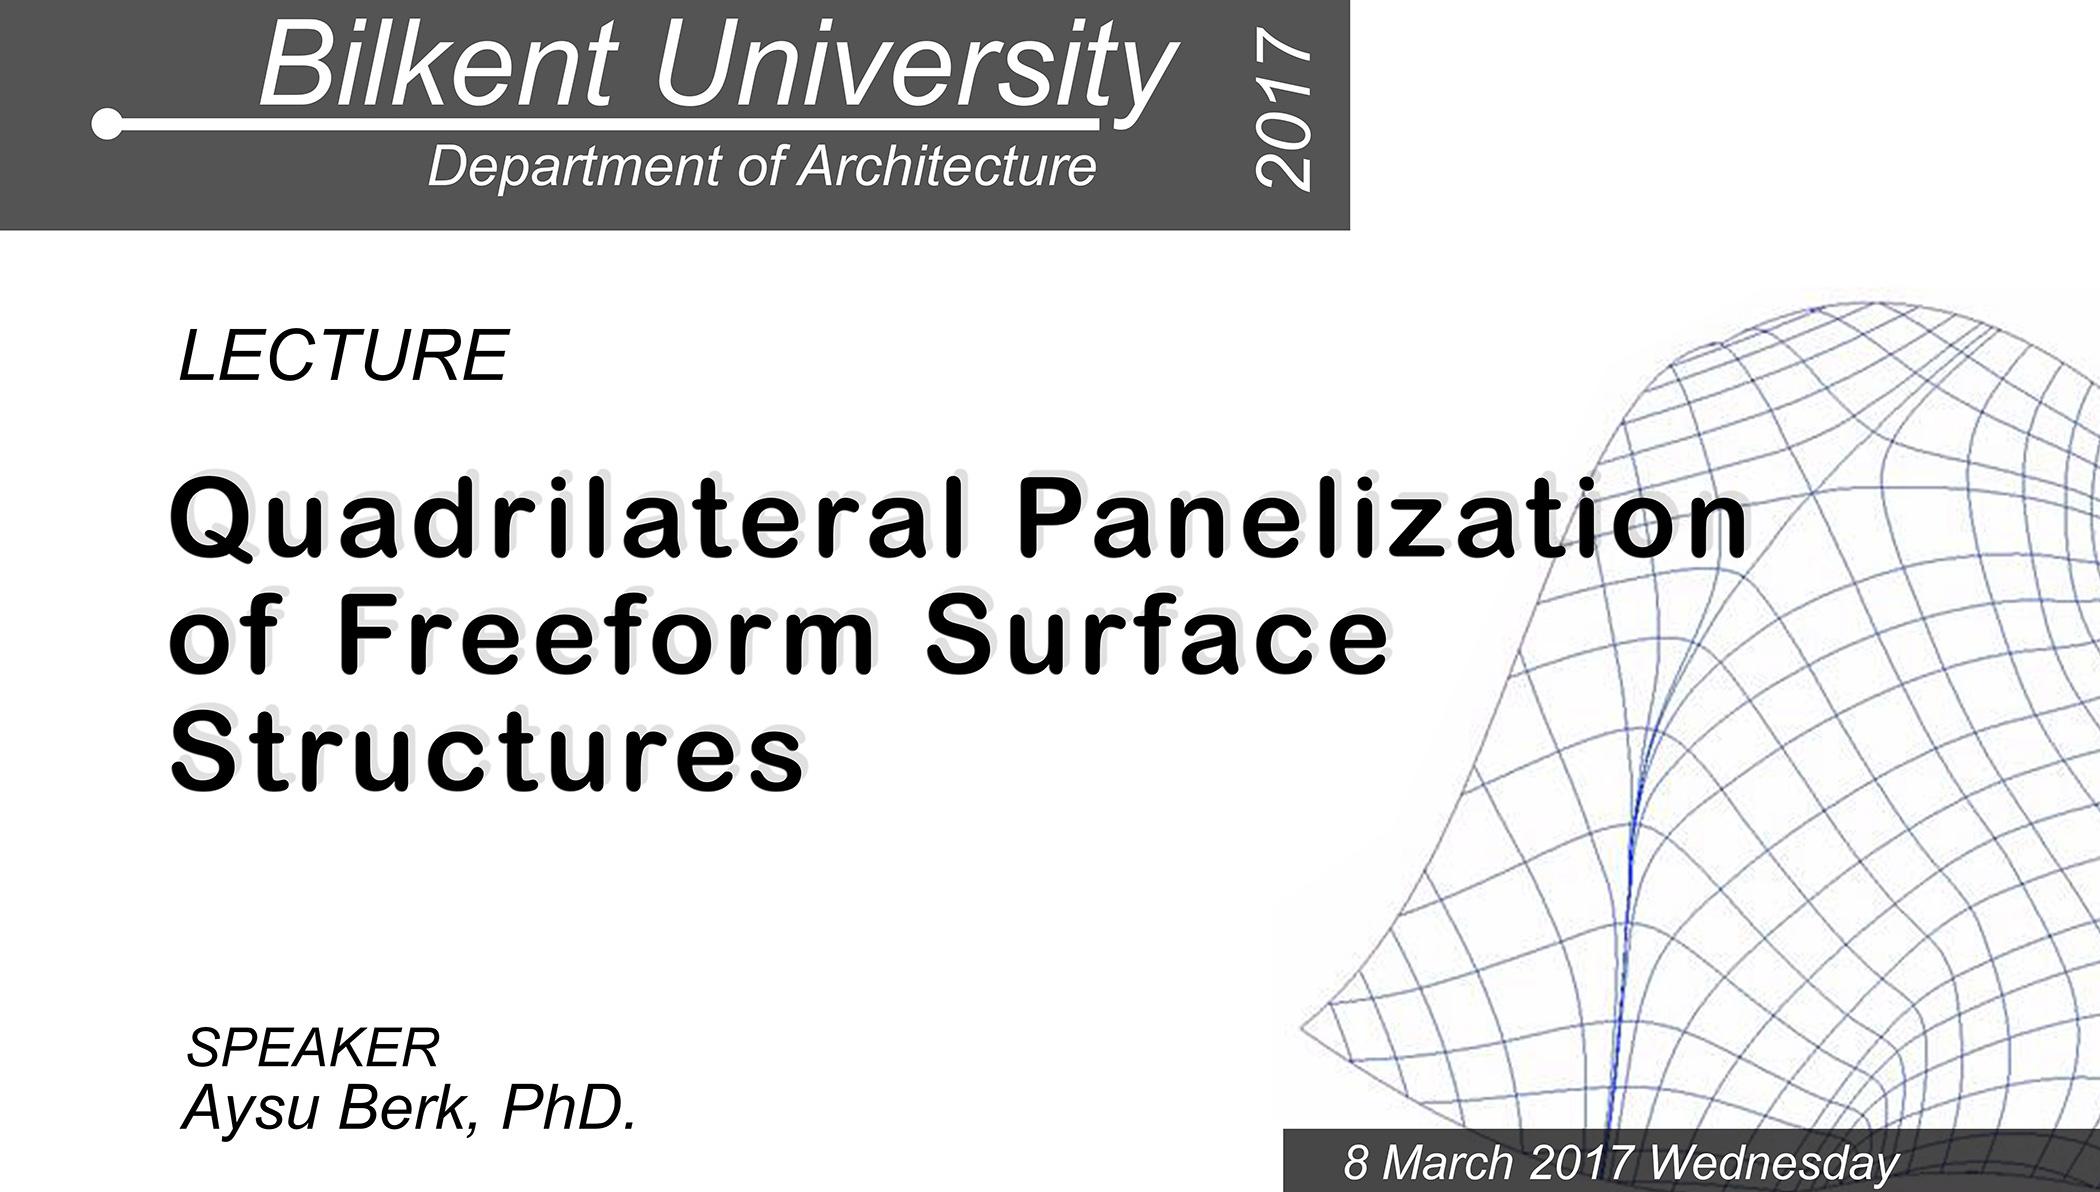 Quadrilateral Panelization of Freeform Surface Structures